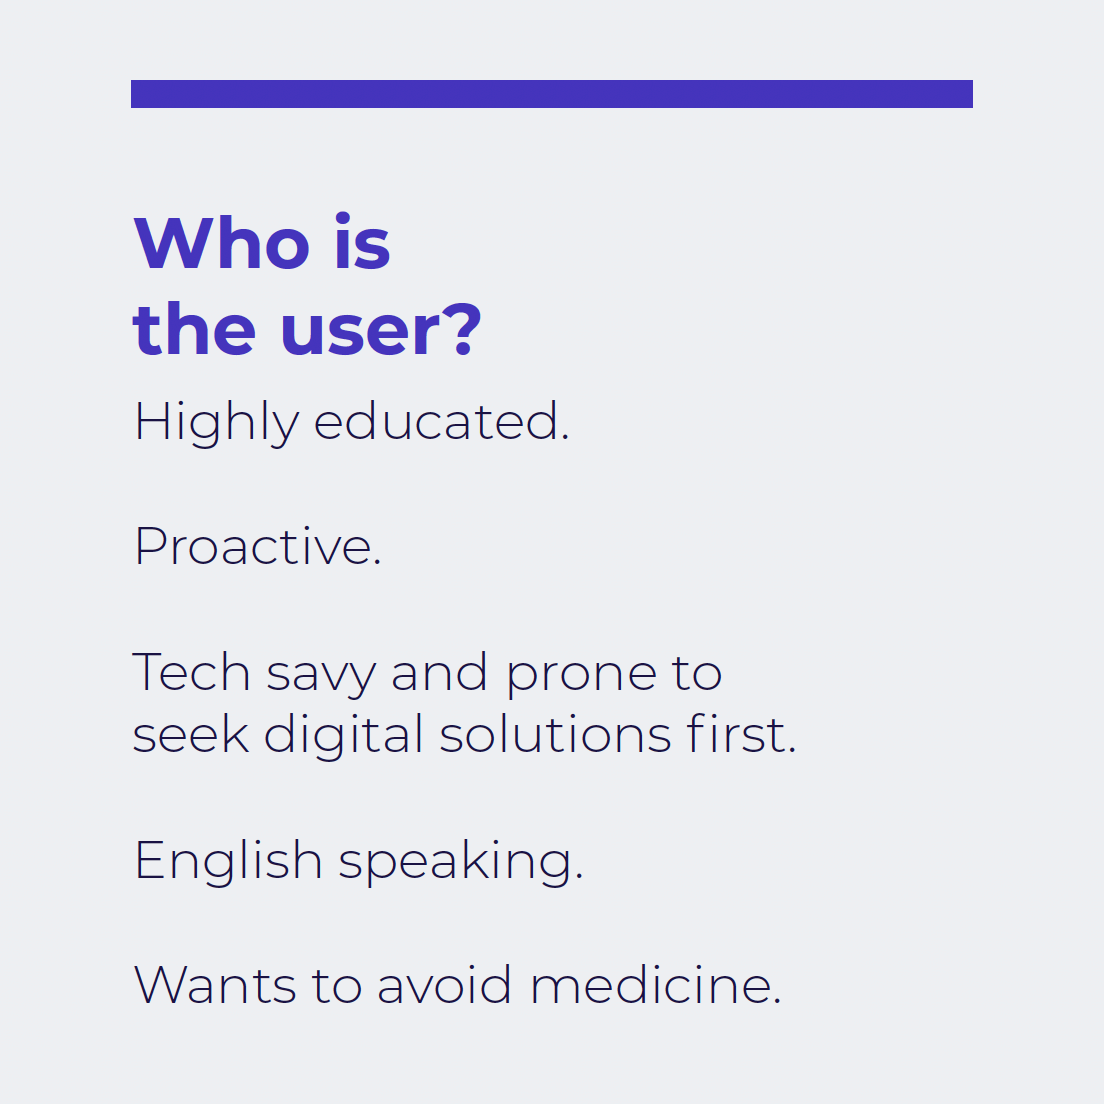 who is the user, branding process